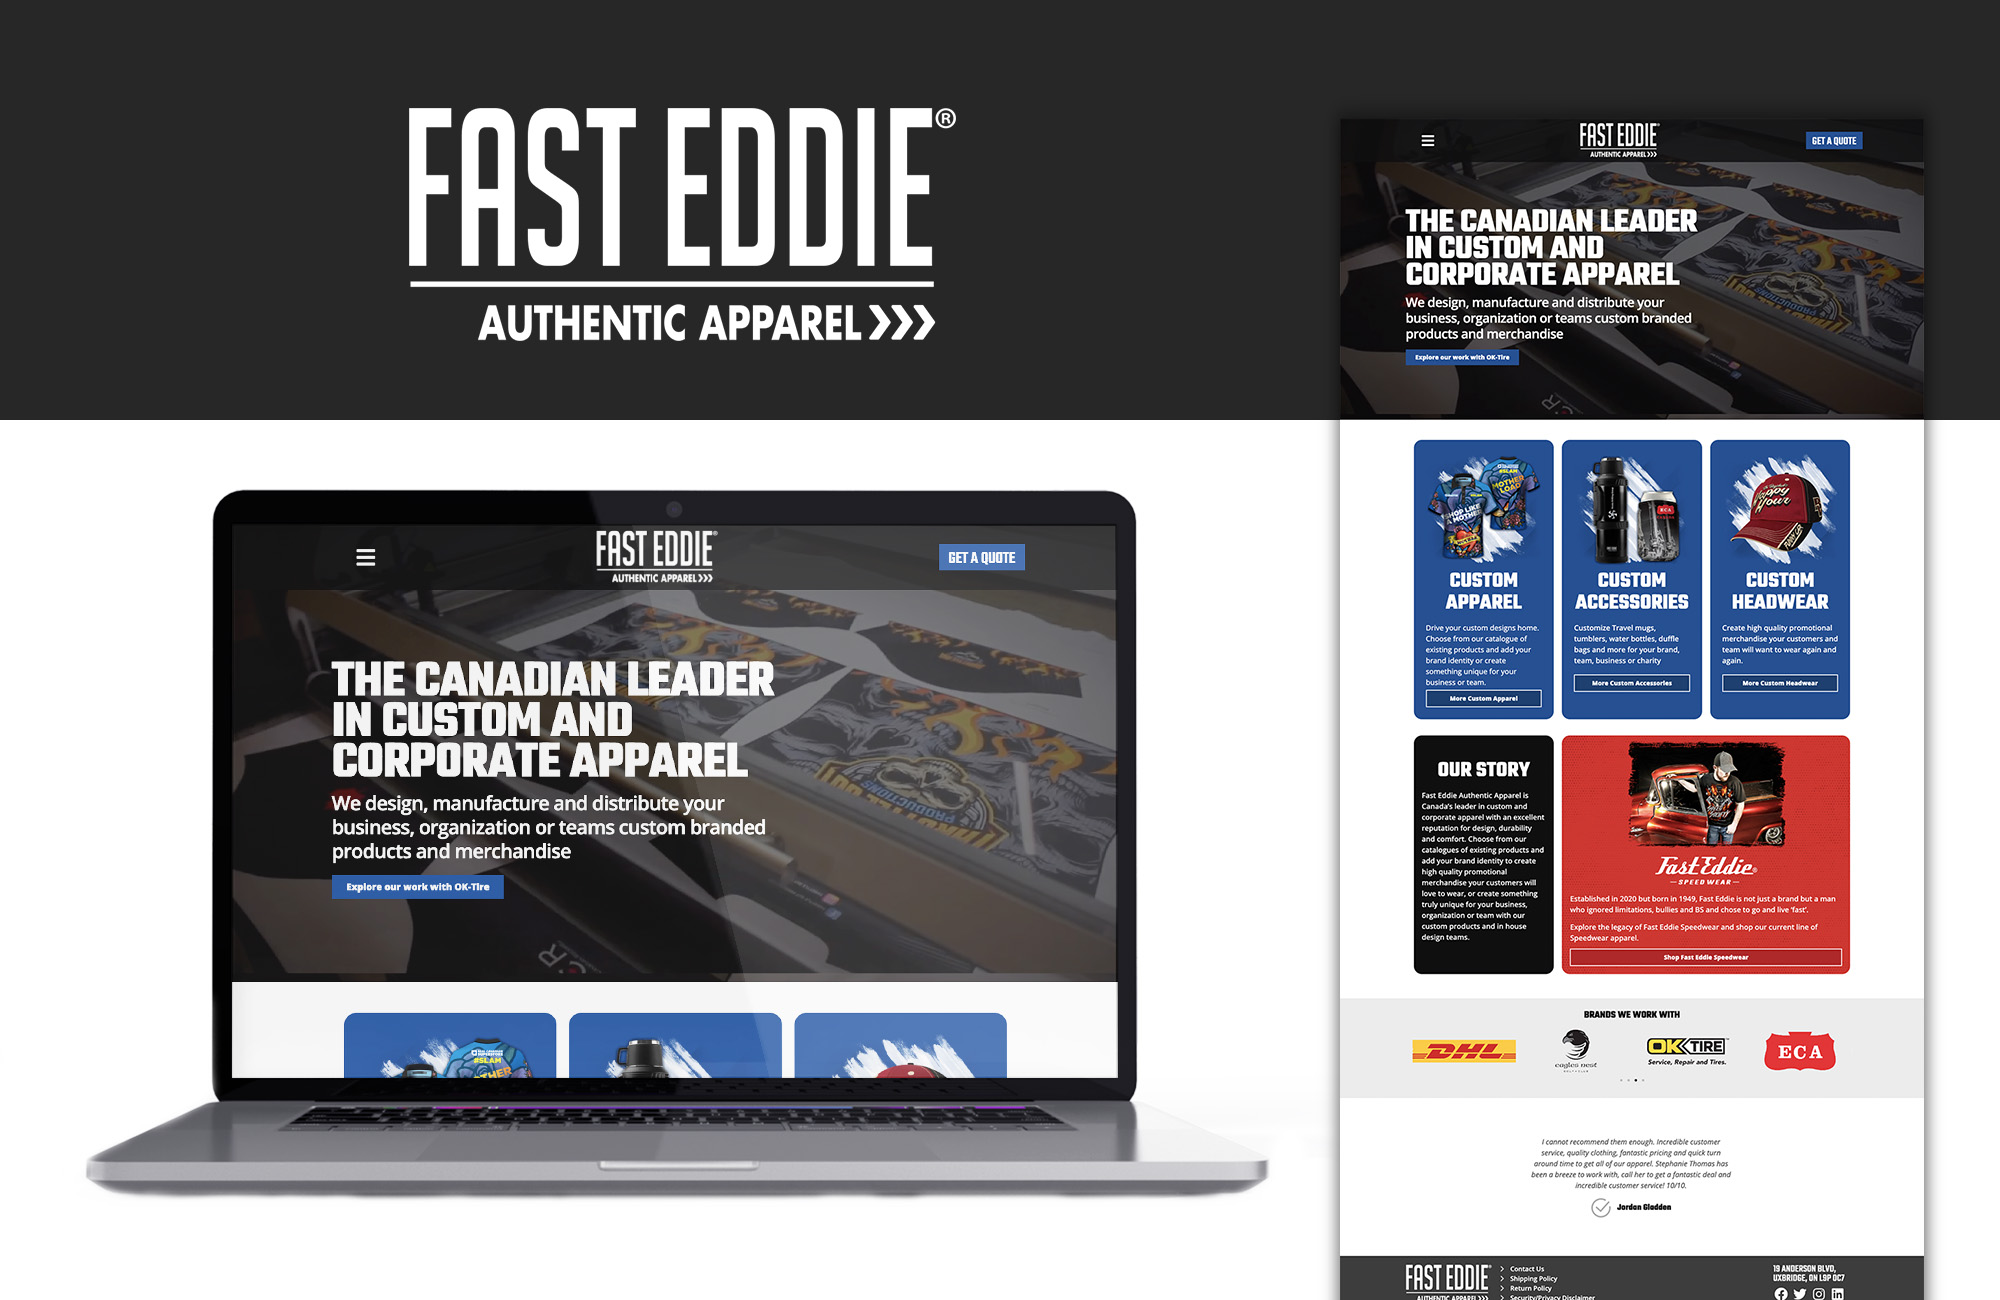 Fast Eddie Authentic Apparel – Take Root Creative